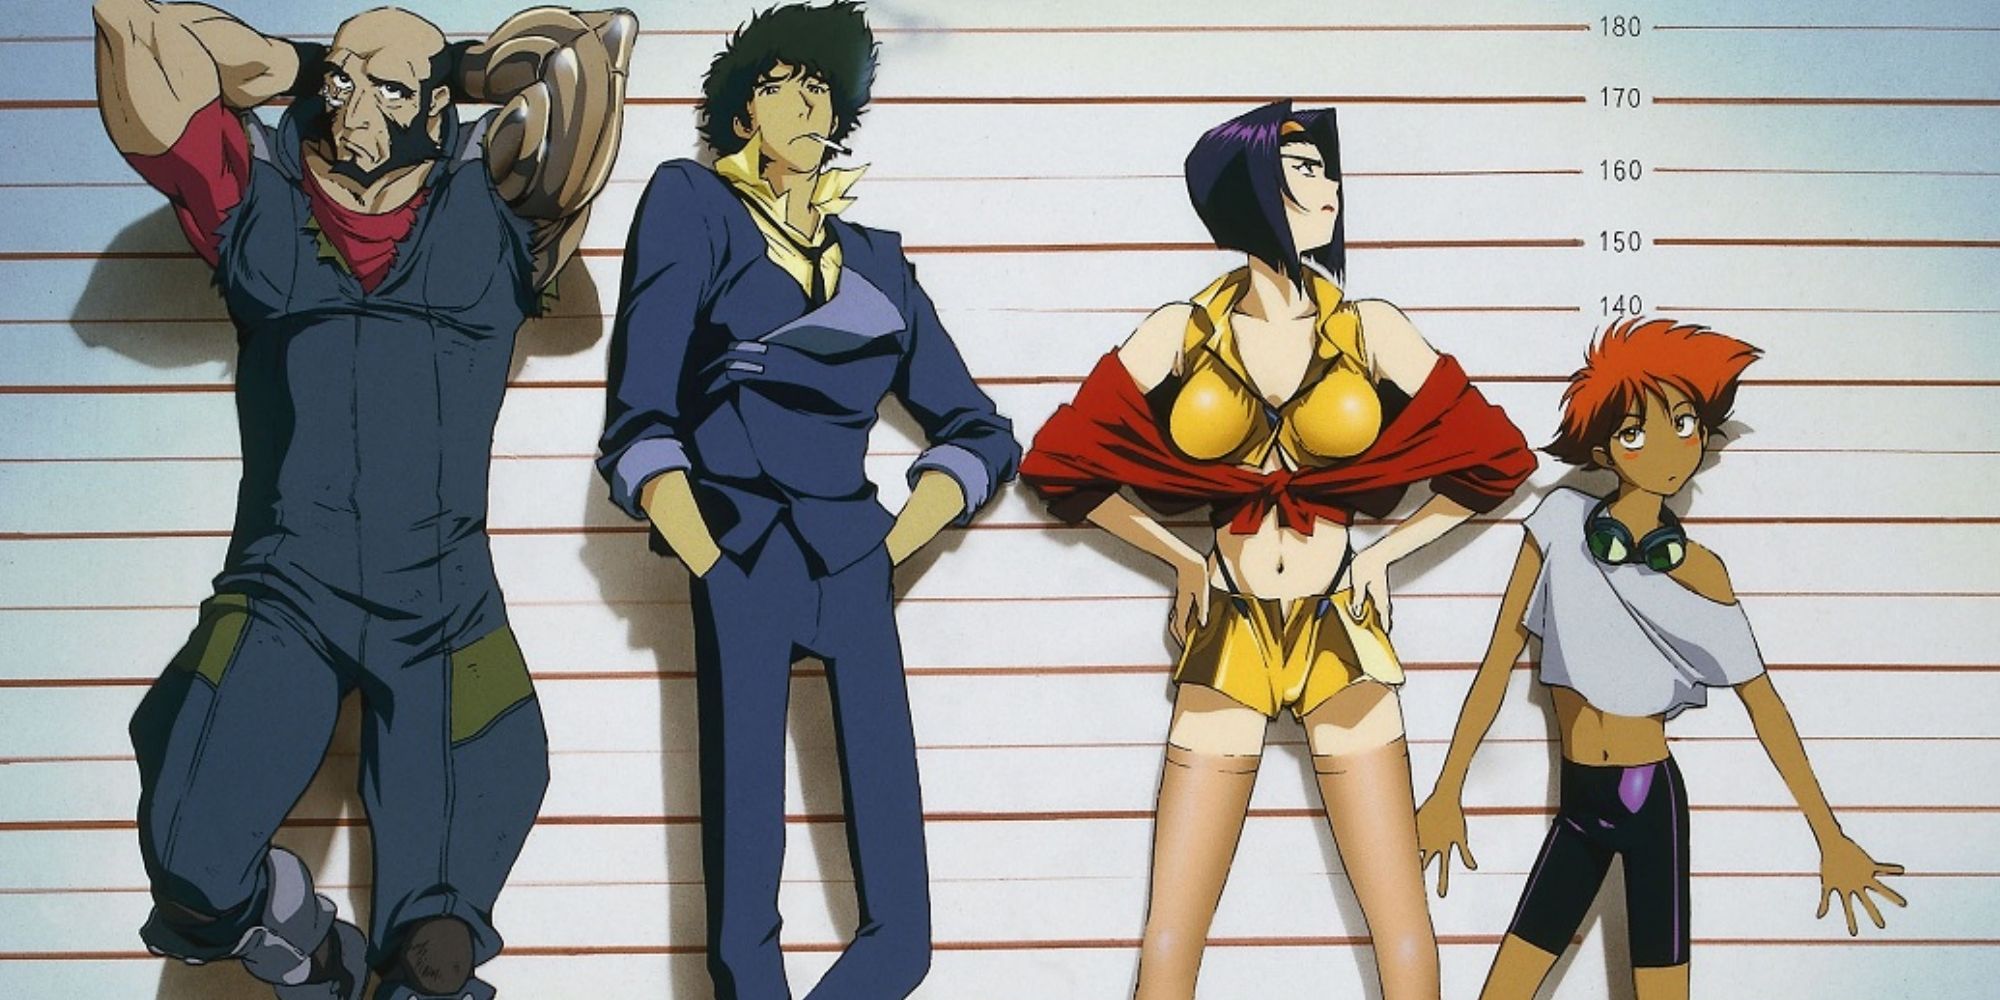 Promotional poster for 'Cowboy Bebop' showing a police lineup of the Bebop crew